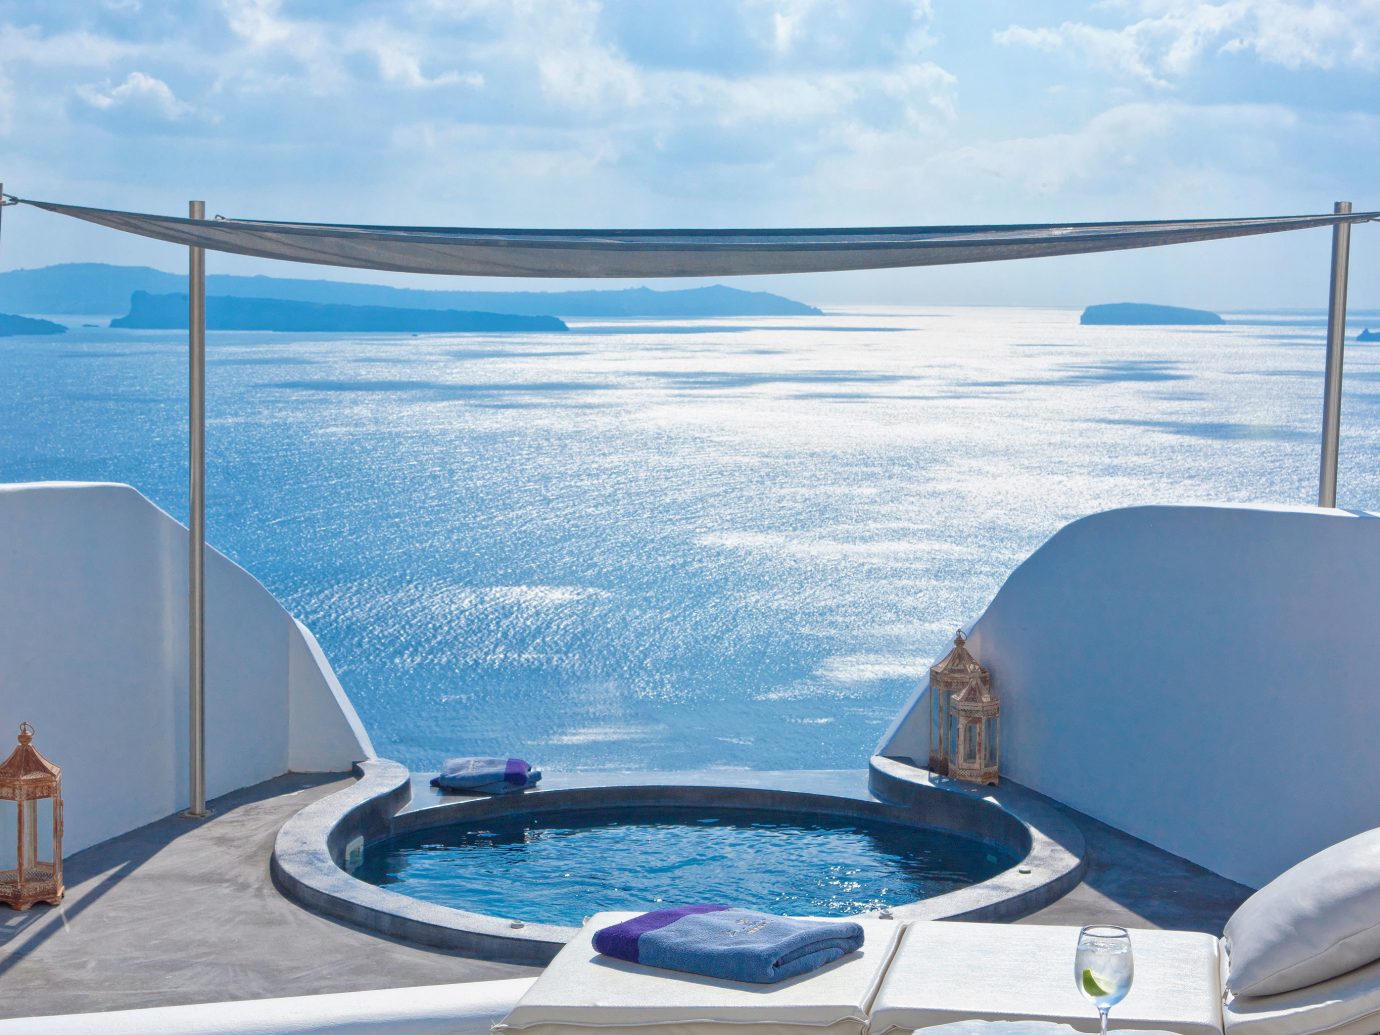 Balcony Classic Elegant Greece Hot tub/Jacuzzi Hotels Island Luxury Romantic Santorini Scenic views Suite Trip Ideas Waterfront sky water outdoor swimming pool yacht Boat vehicle vacation Ocean overlooking passenger ship Sea bed jacuzzi Deck day